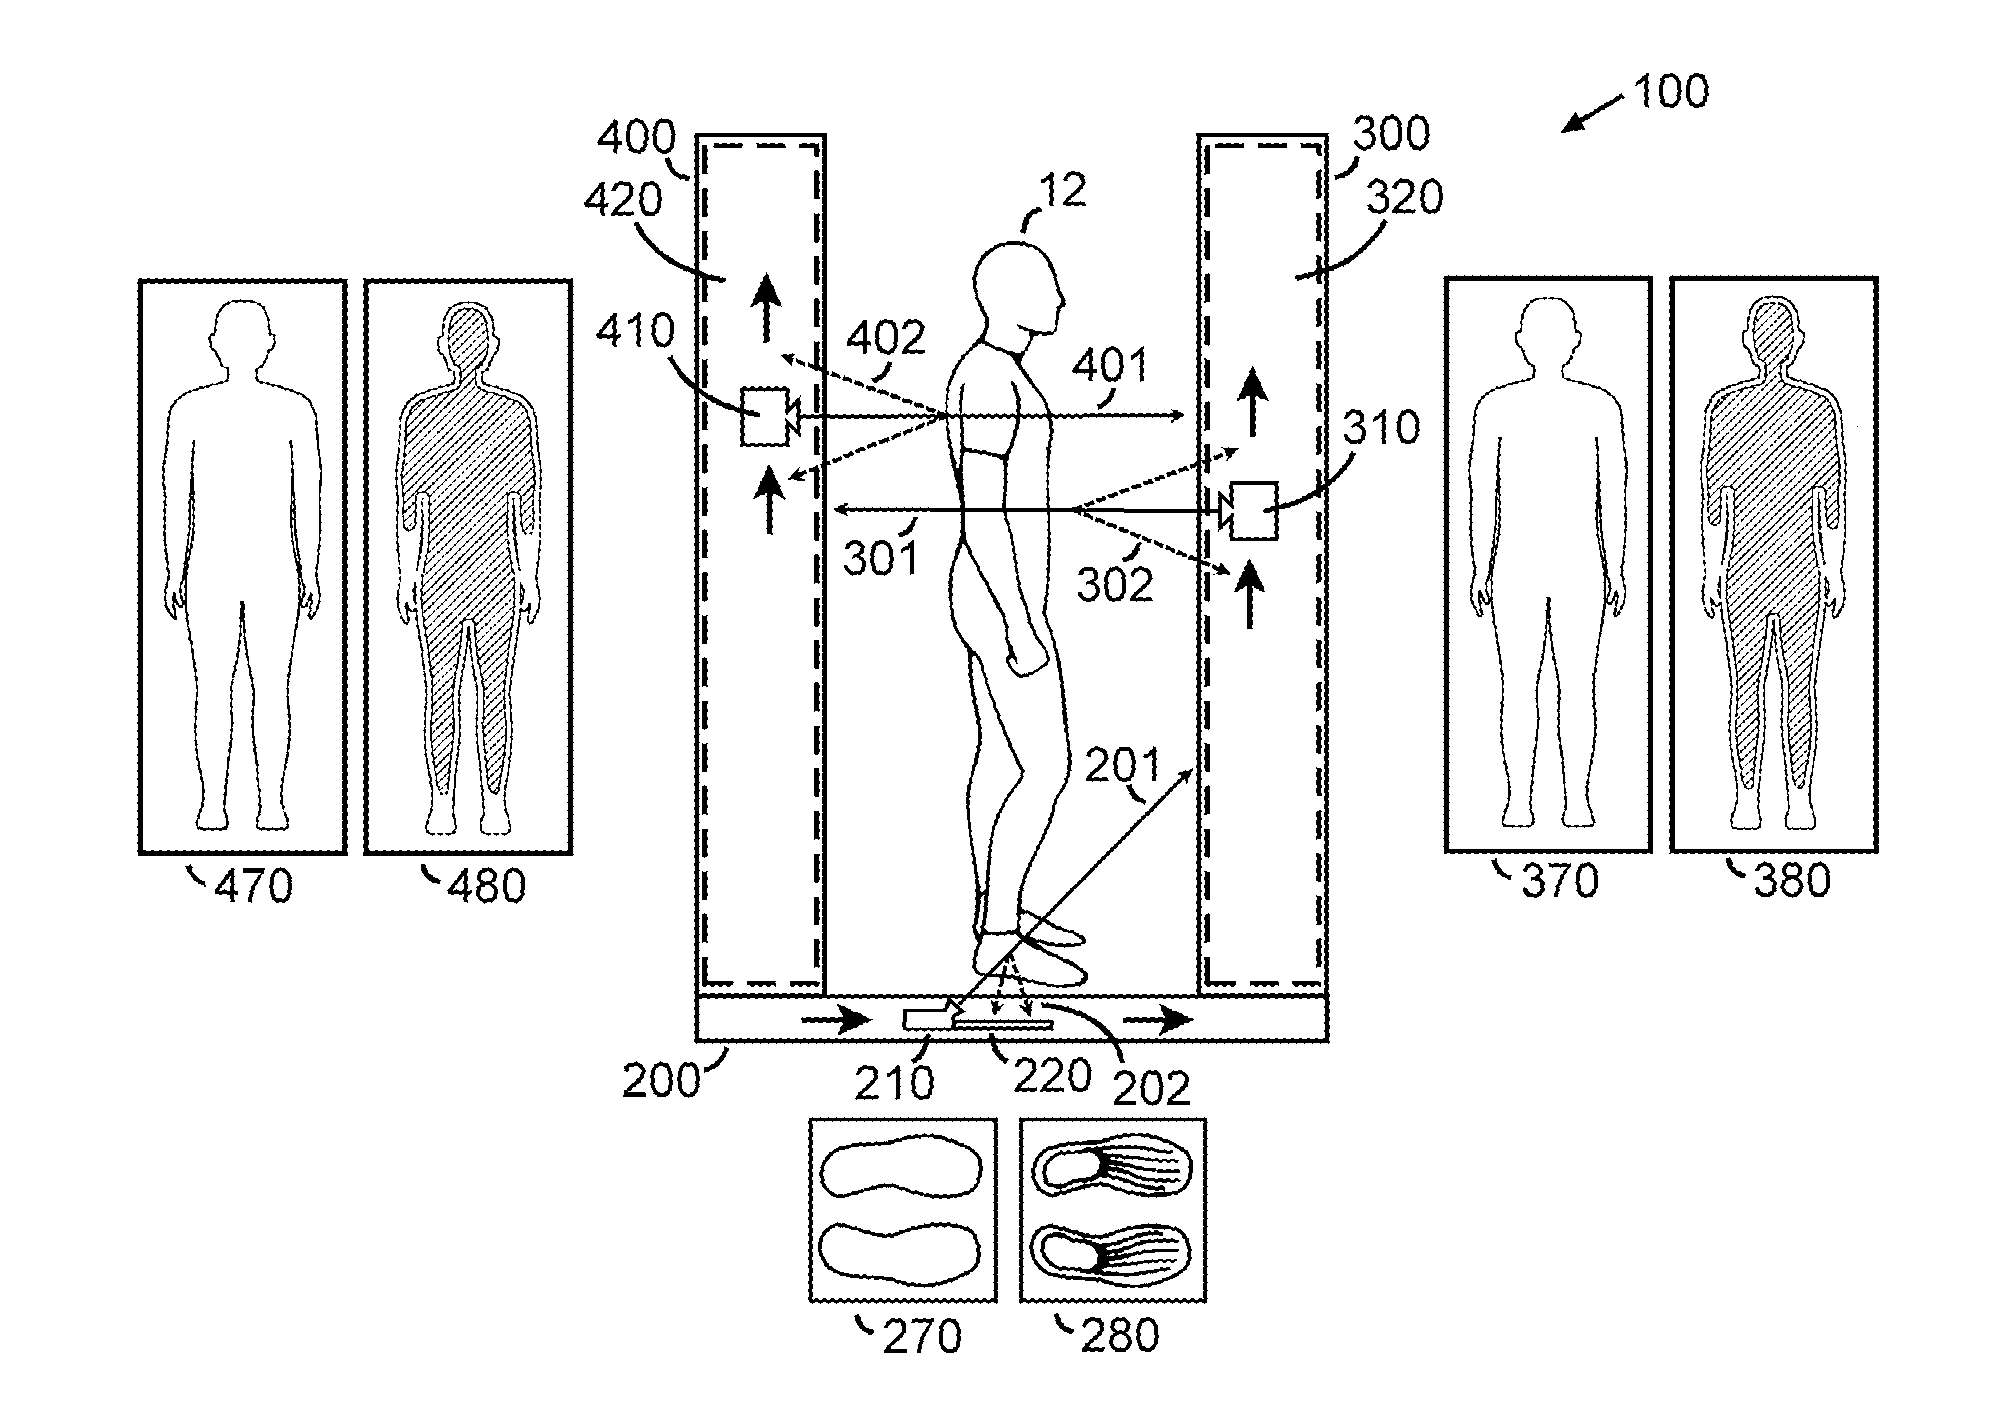 Body Scanner With Improved X-ray Transmission Imaging